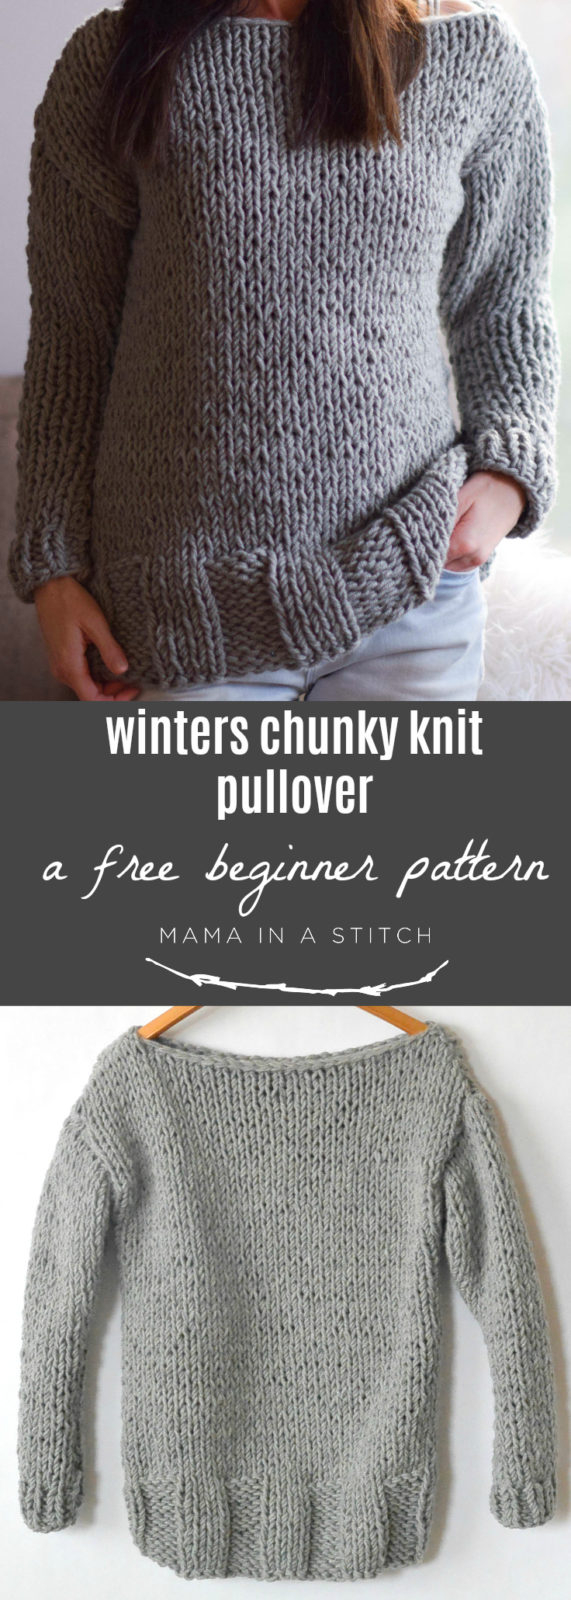 Free Cardigan Knitting Pattern Winters Chunky Easy Knit Pullover Pattern Mama In A Stitch